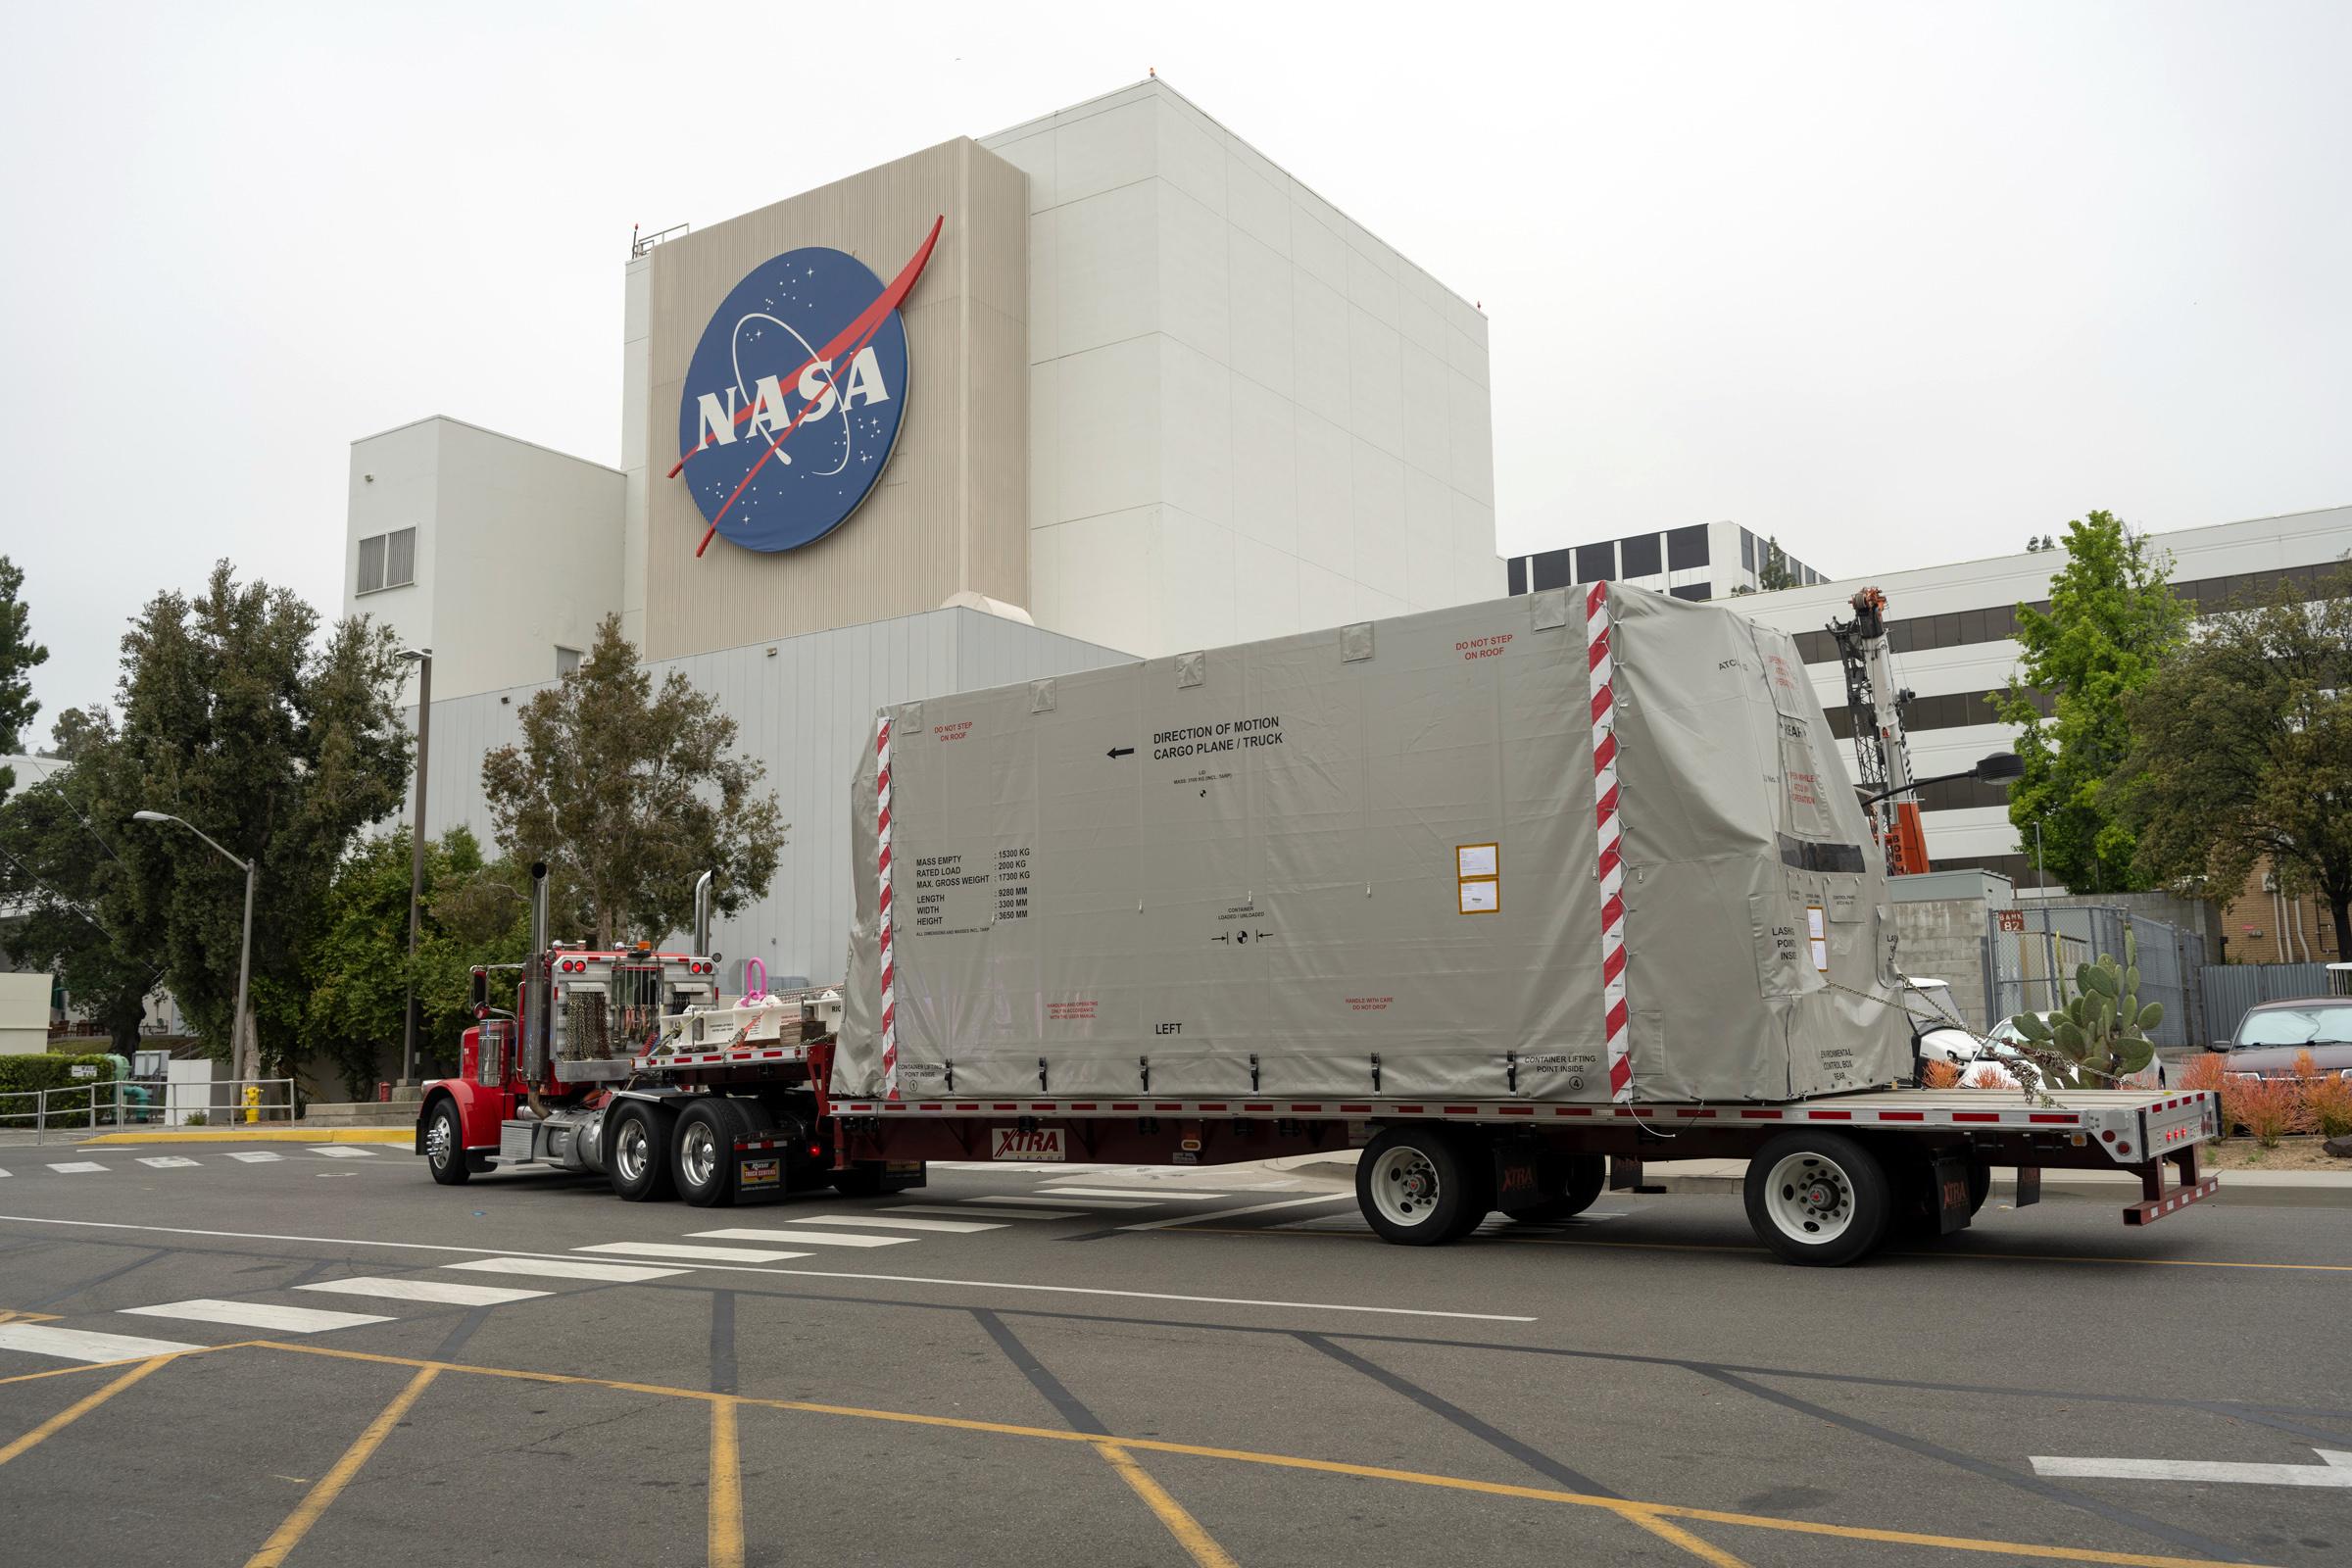 A truck arrives in front of a large white building at the Jet Propulsion Laboratory with the NASA logo on it.